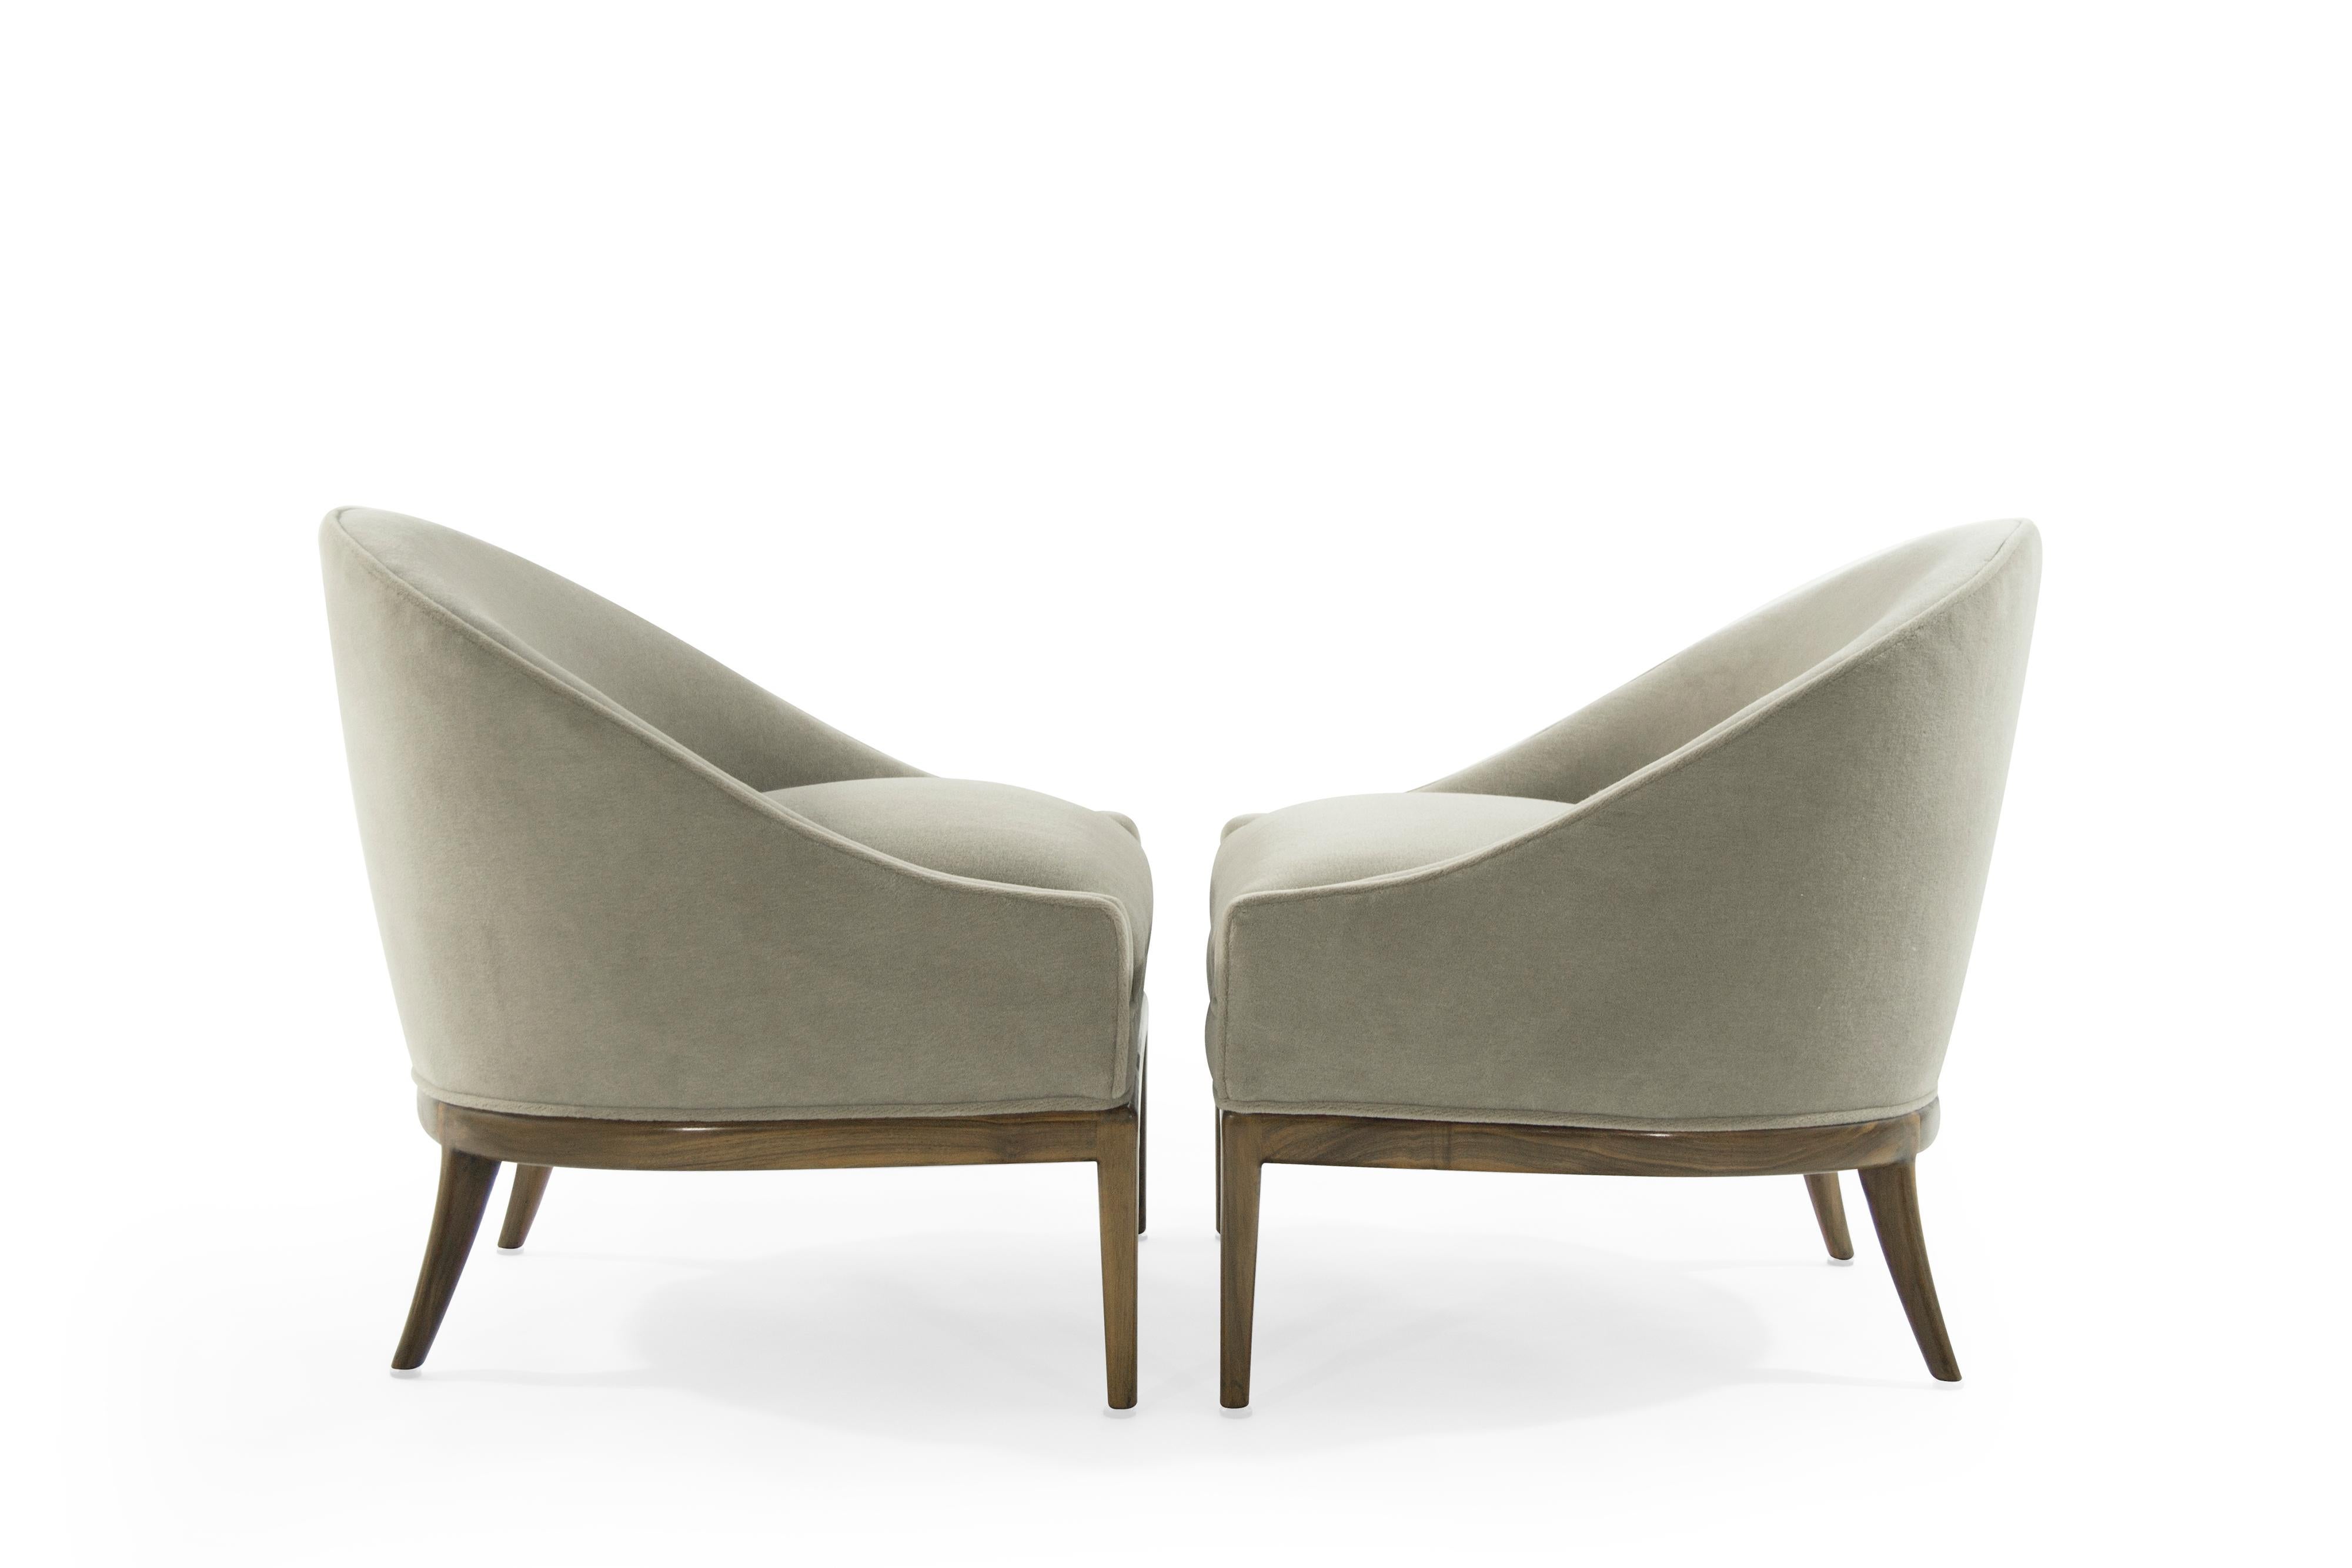 Set of lounge chairs in the style of T.H. Robsjohn-Gibbings for Widdicomb, circa 1950s.

Newly upholstered in natural mohair by Holly Hunt, walnut bases fully restored.